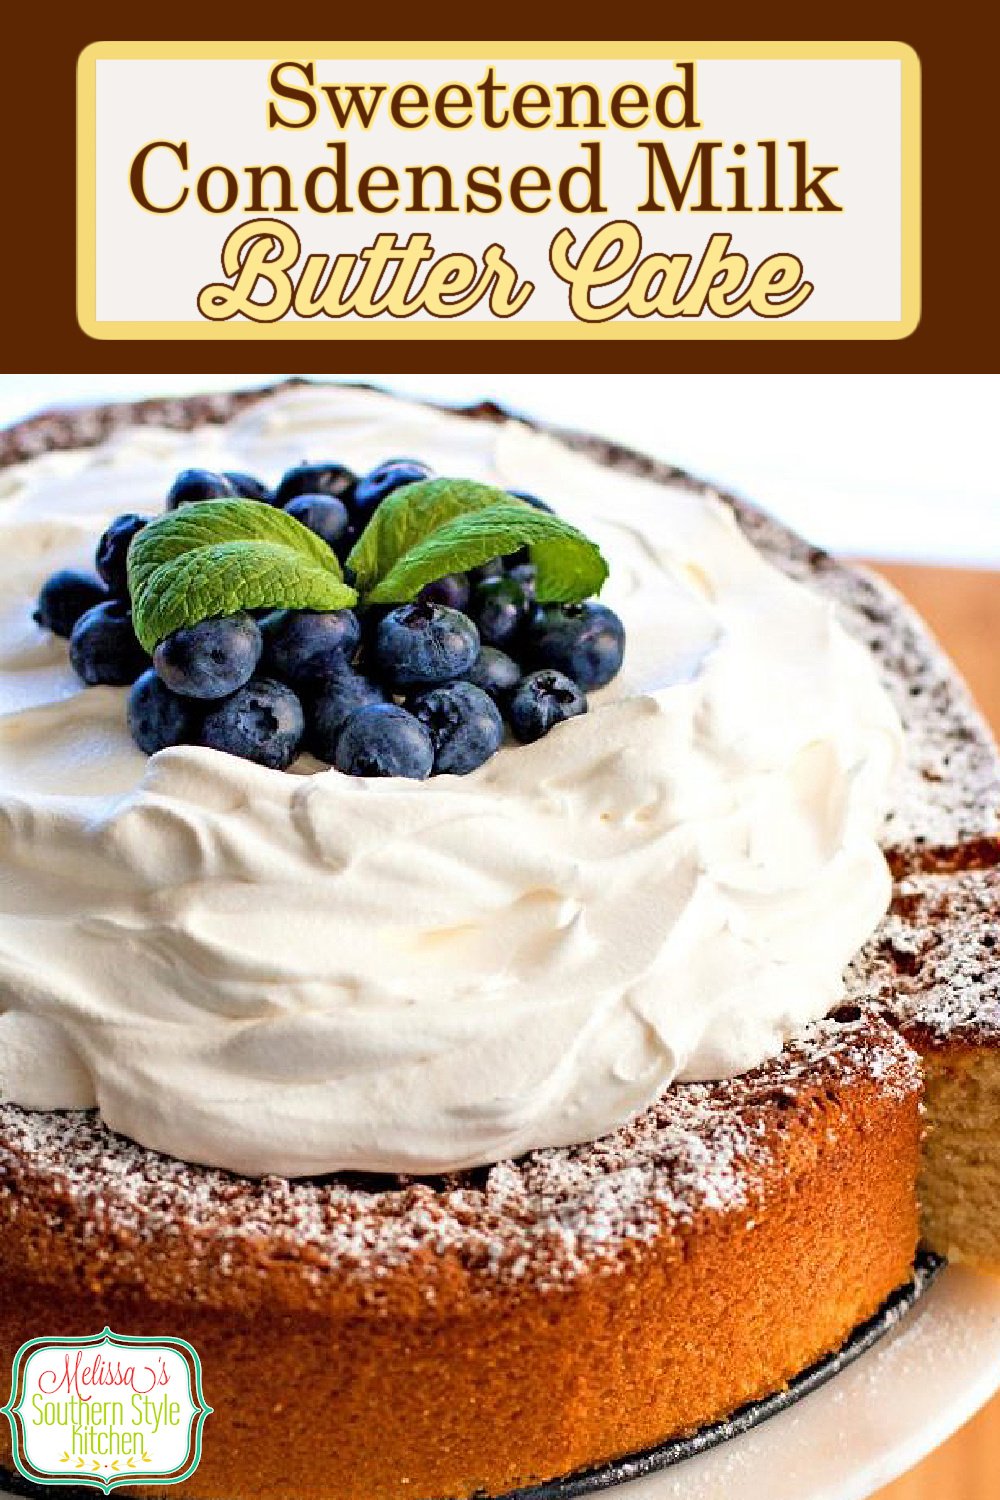 Top this single layer Sweetened Condensed Milk Butter Cake with fresh fruit and whipped cream for a heavenly dessert #sweetenedcondensedmilkcake #buttercake #cakerecipes #southerncakes #southernrecipes #milkcake #desserts #bestcakerecipes